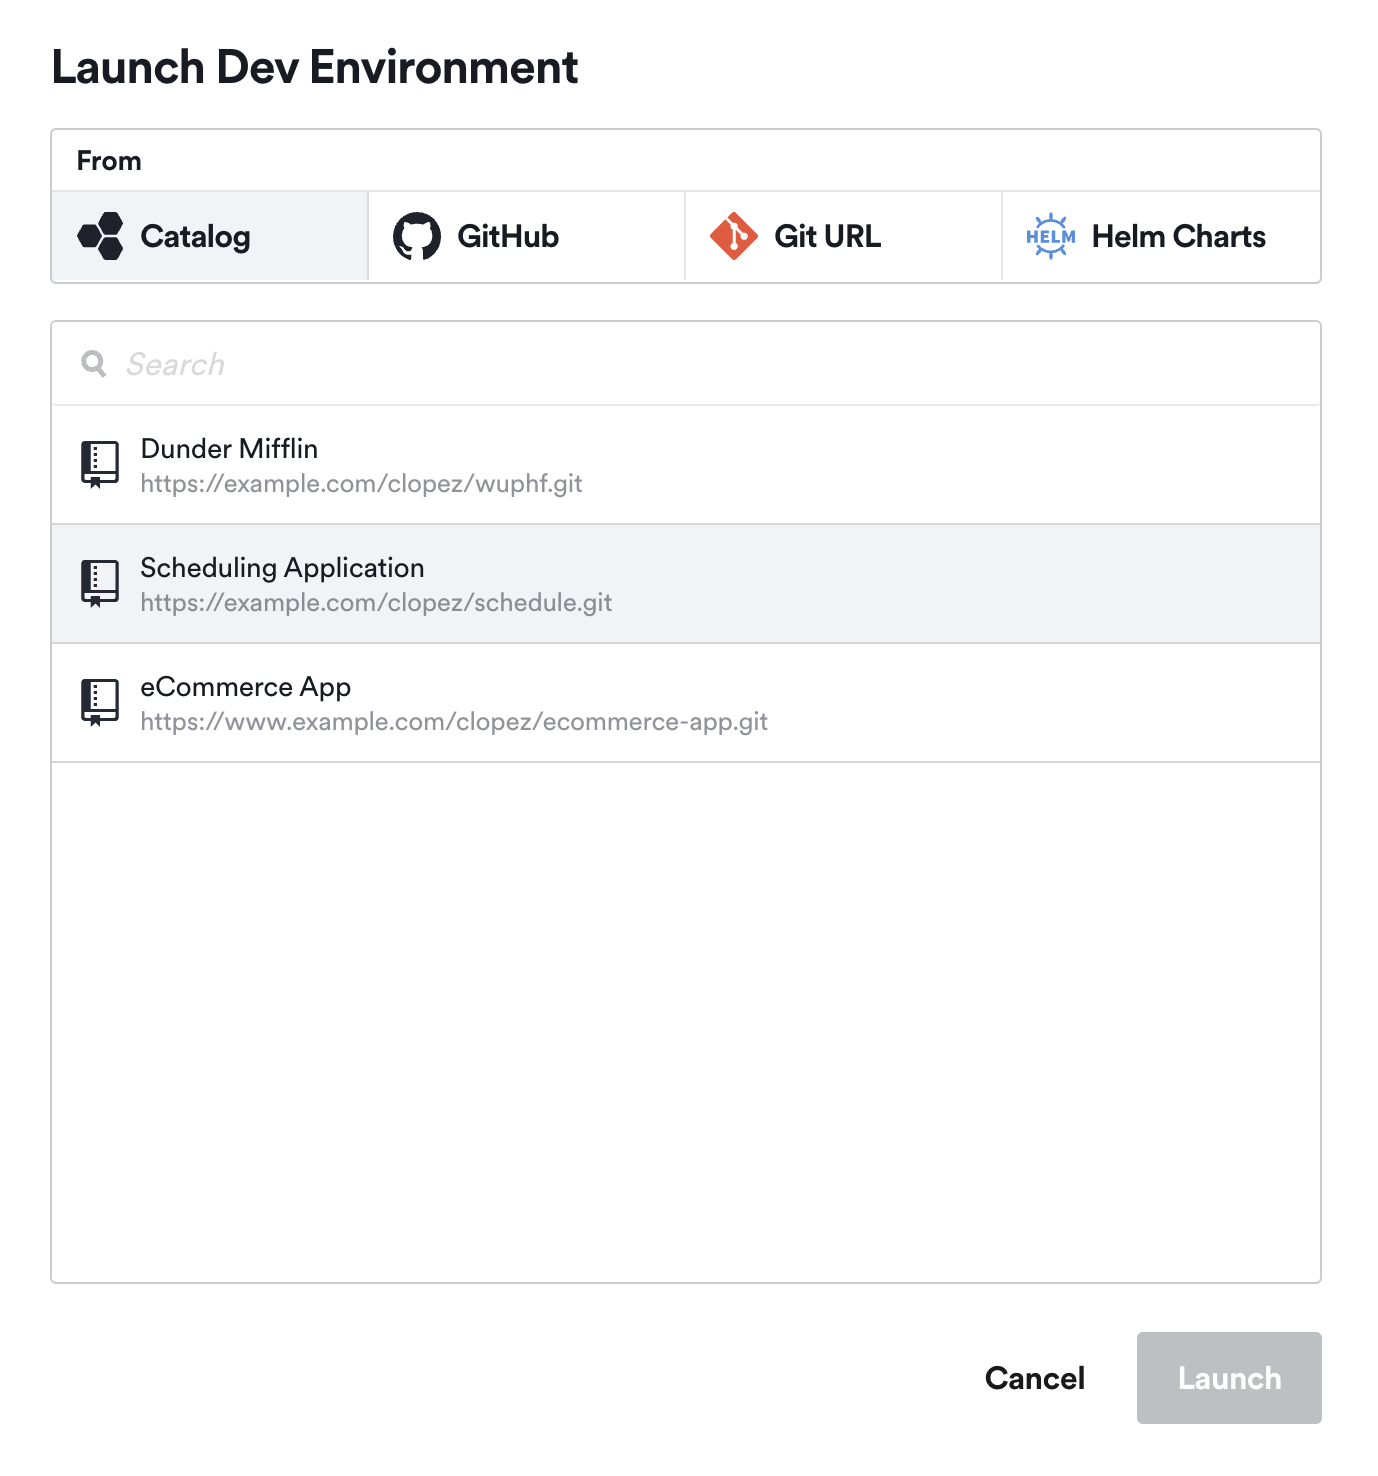 launch a development environment from the Catalog